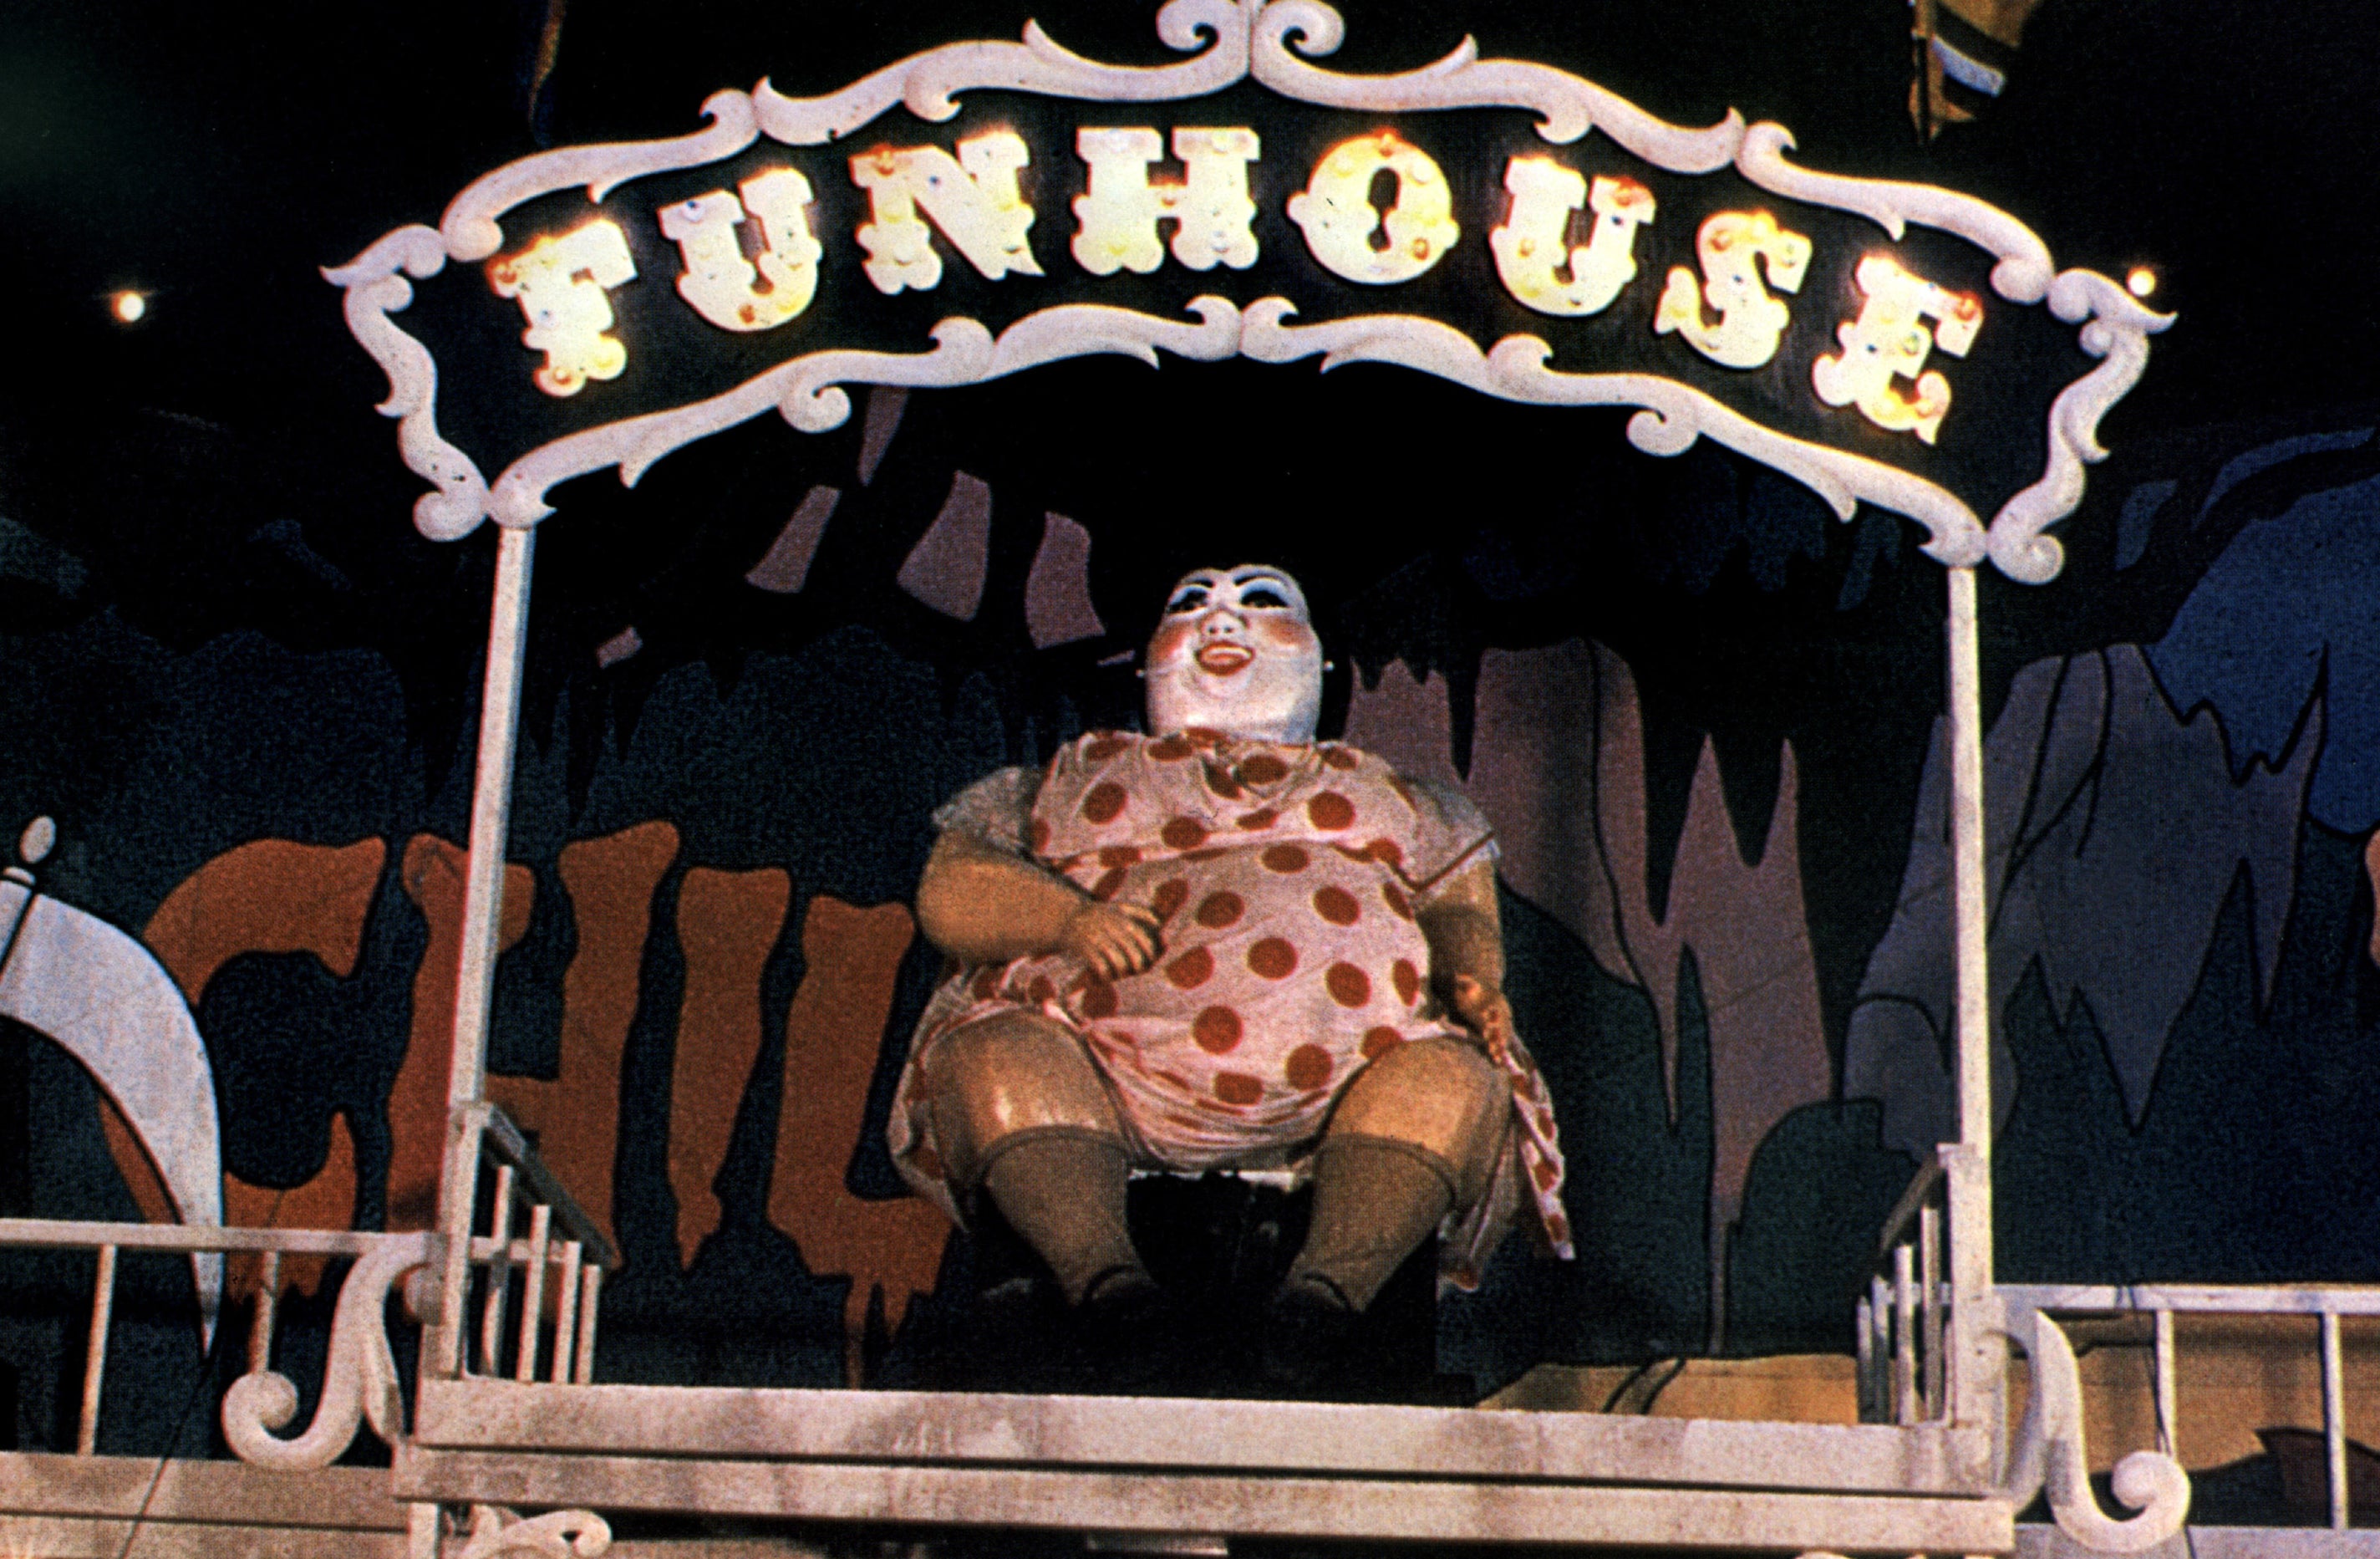 A disturbing clown-like statue adorns the entrance to &quot;The Funhouse&quot;